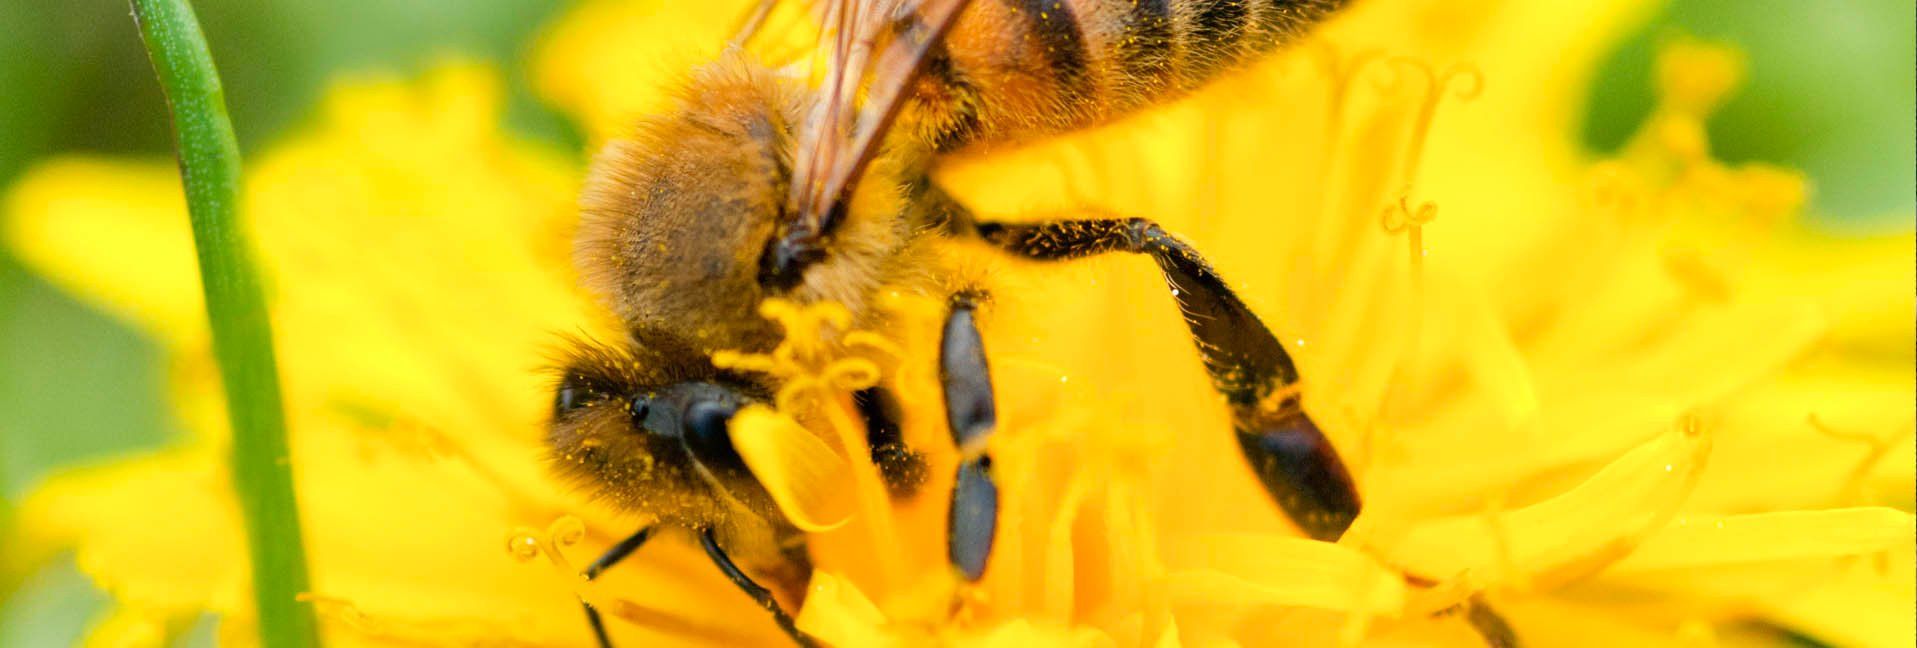 You’ve Got a Friend in Bees - Planting bee-friendly flowers